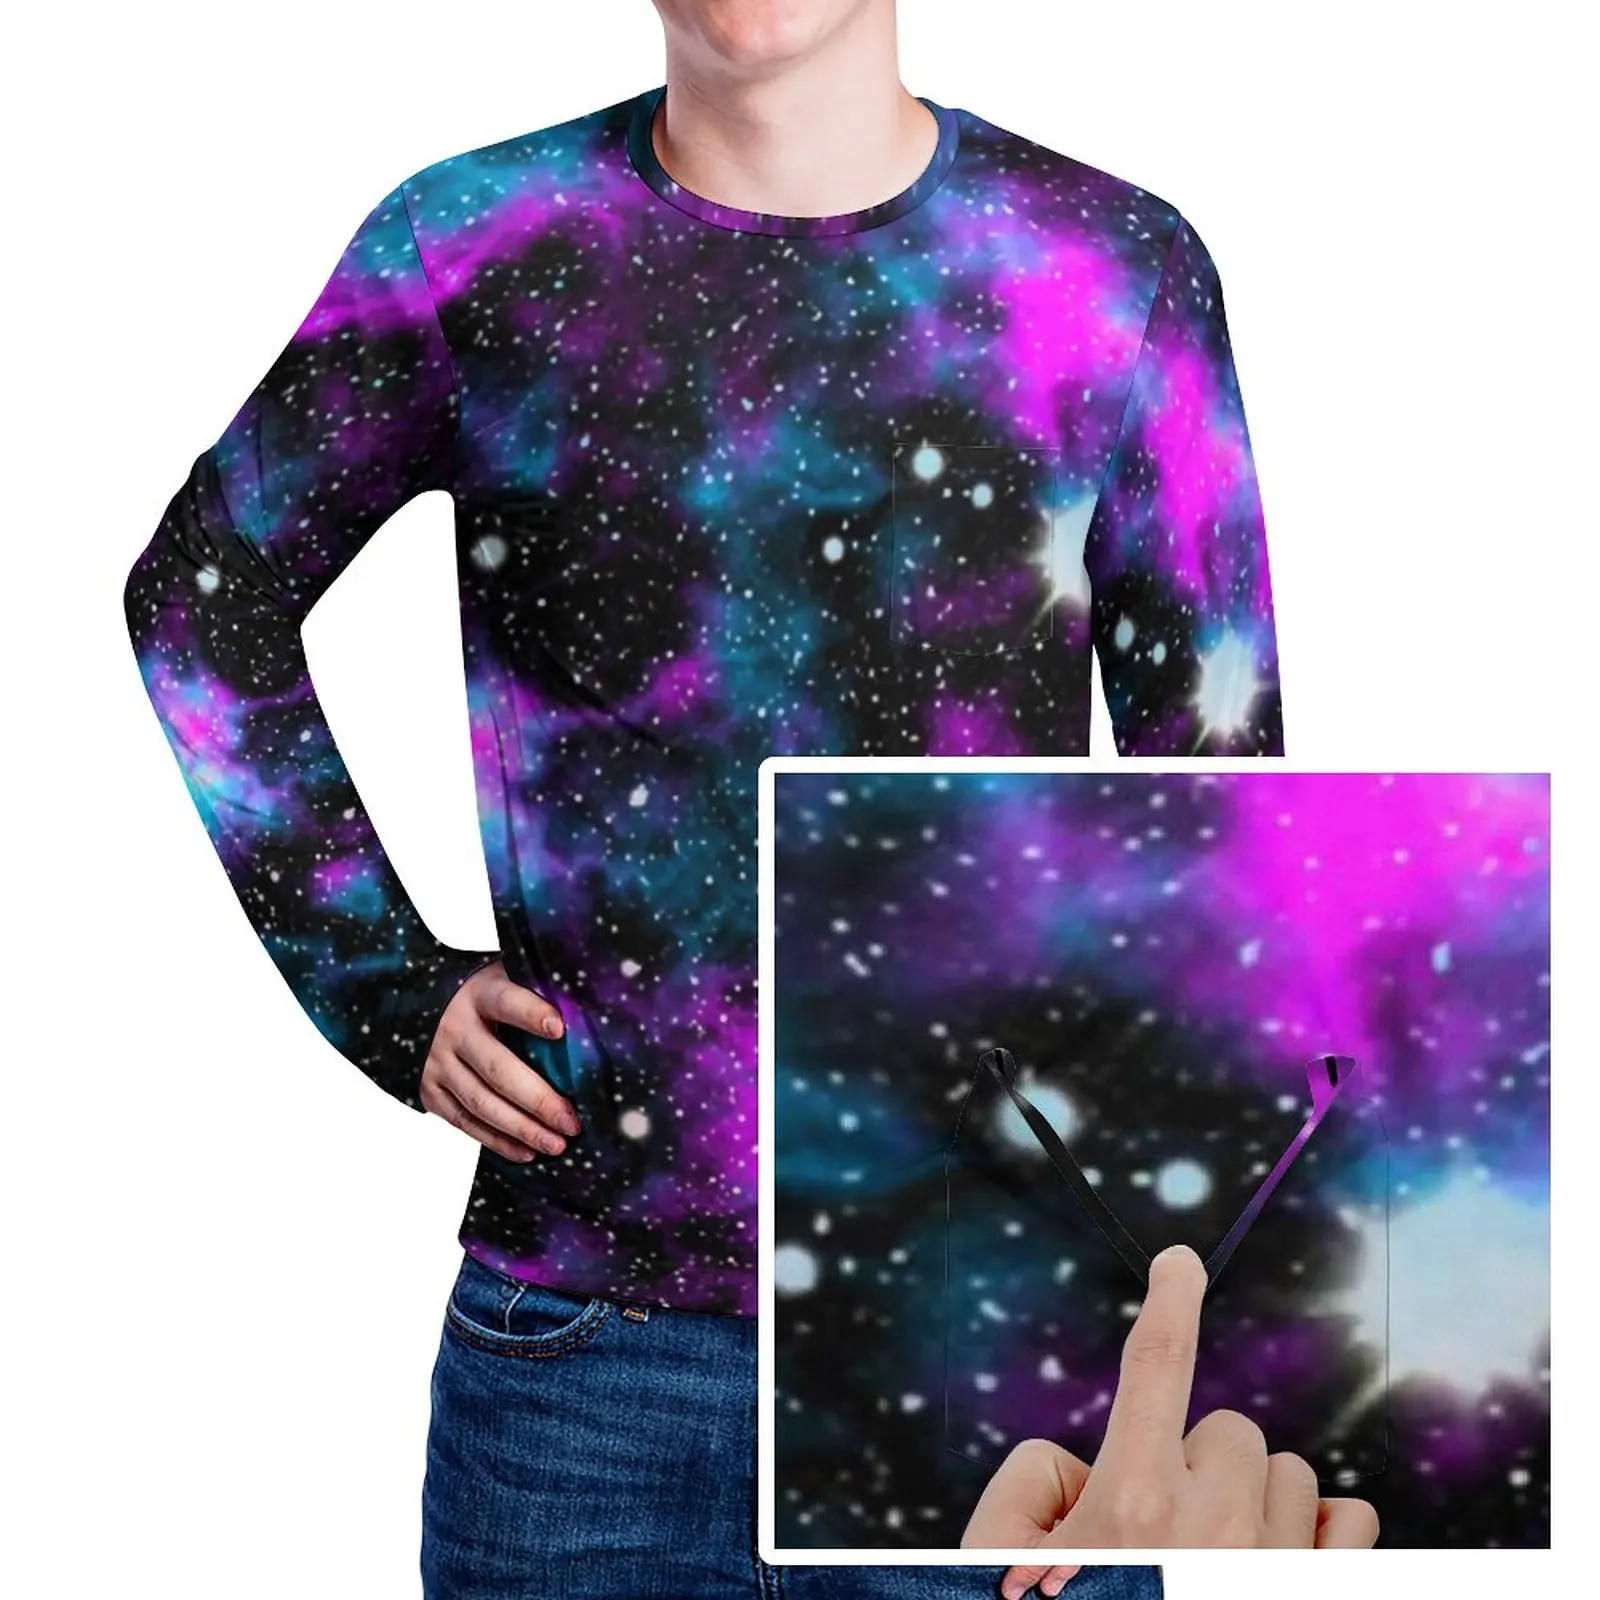 

Blue And Purple Galaxy T-Shirt With Pocket Cosmic Neon Print Novelty T Shirts Men Basic Tshirt Long Sleeve Design Tops Plus Size